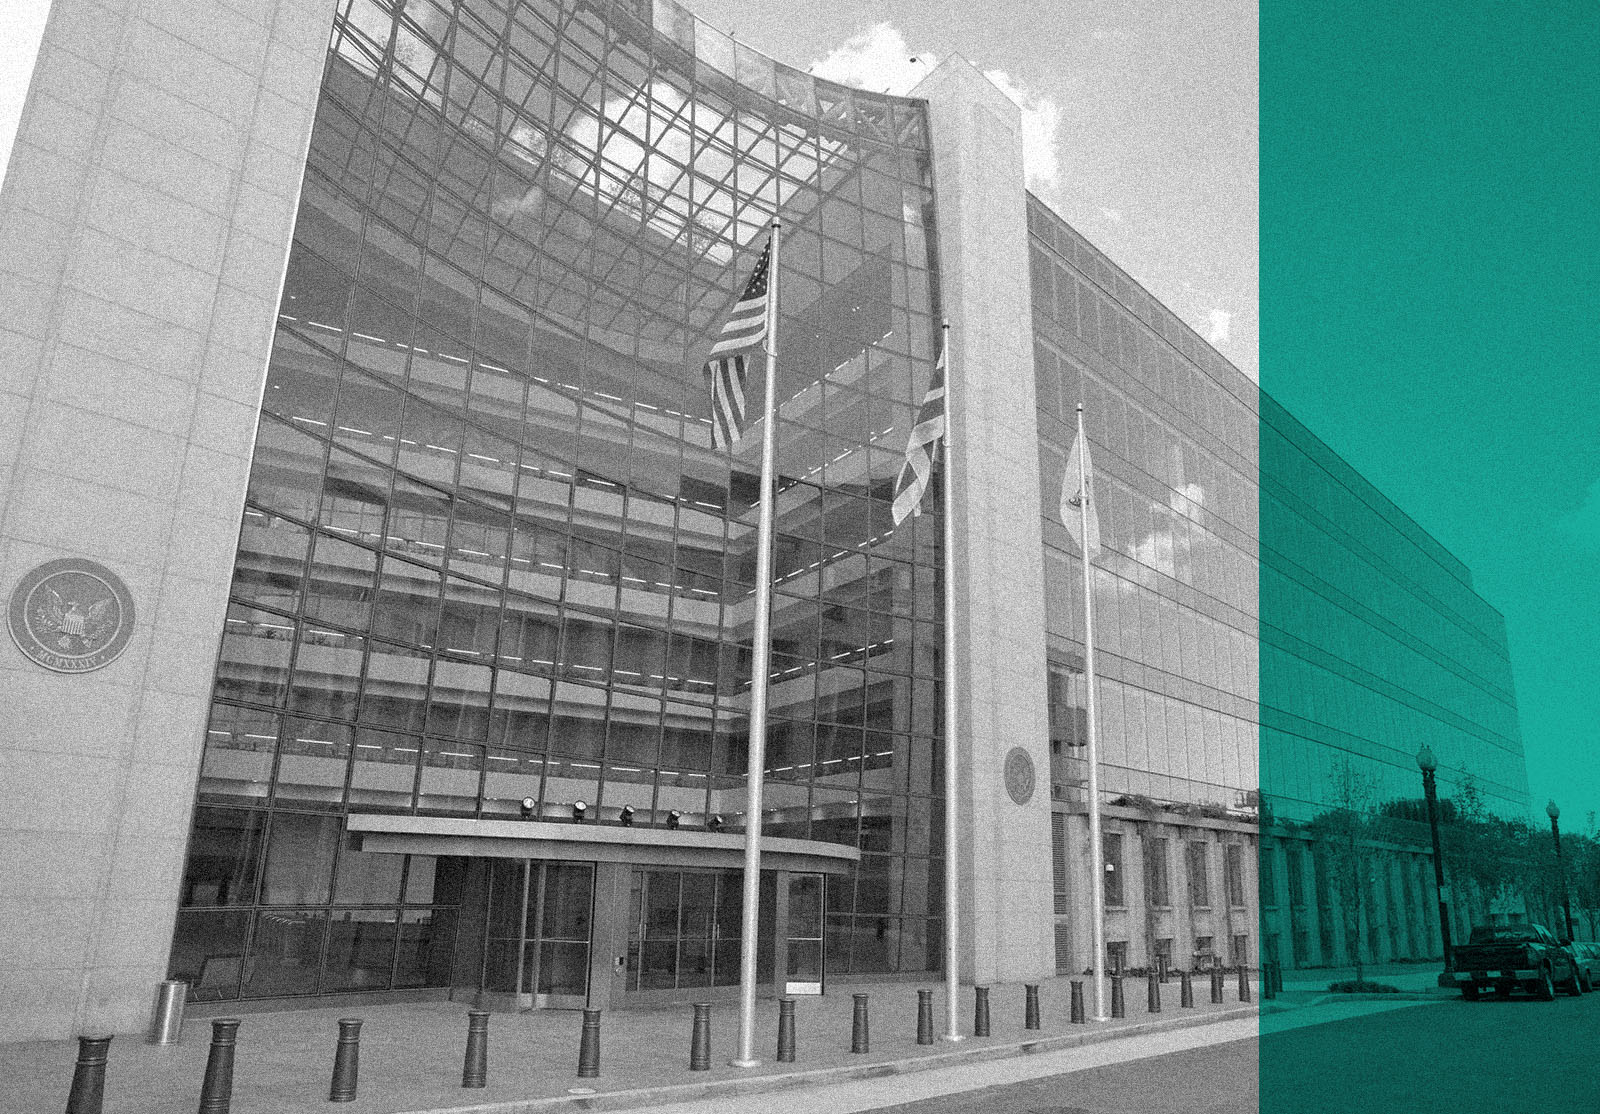 Securities and Exchange Commission, SEC, Building in Washington DC. The SEC regulates stocks and bonds and related financial activities.